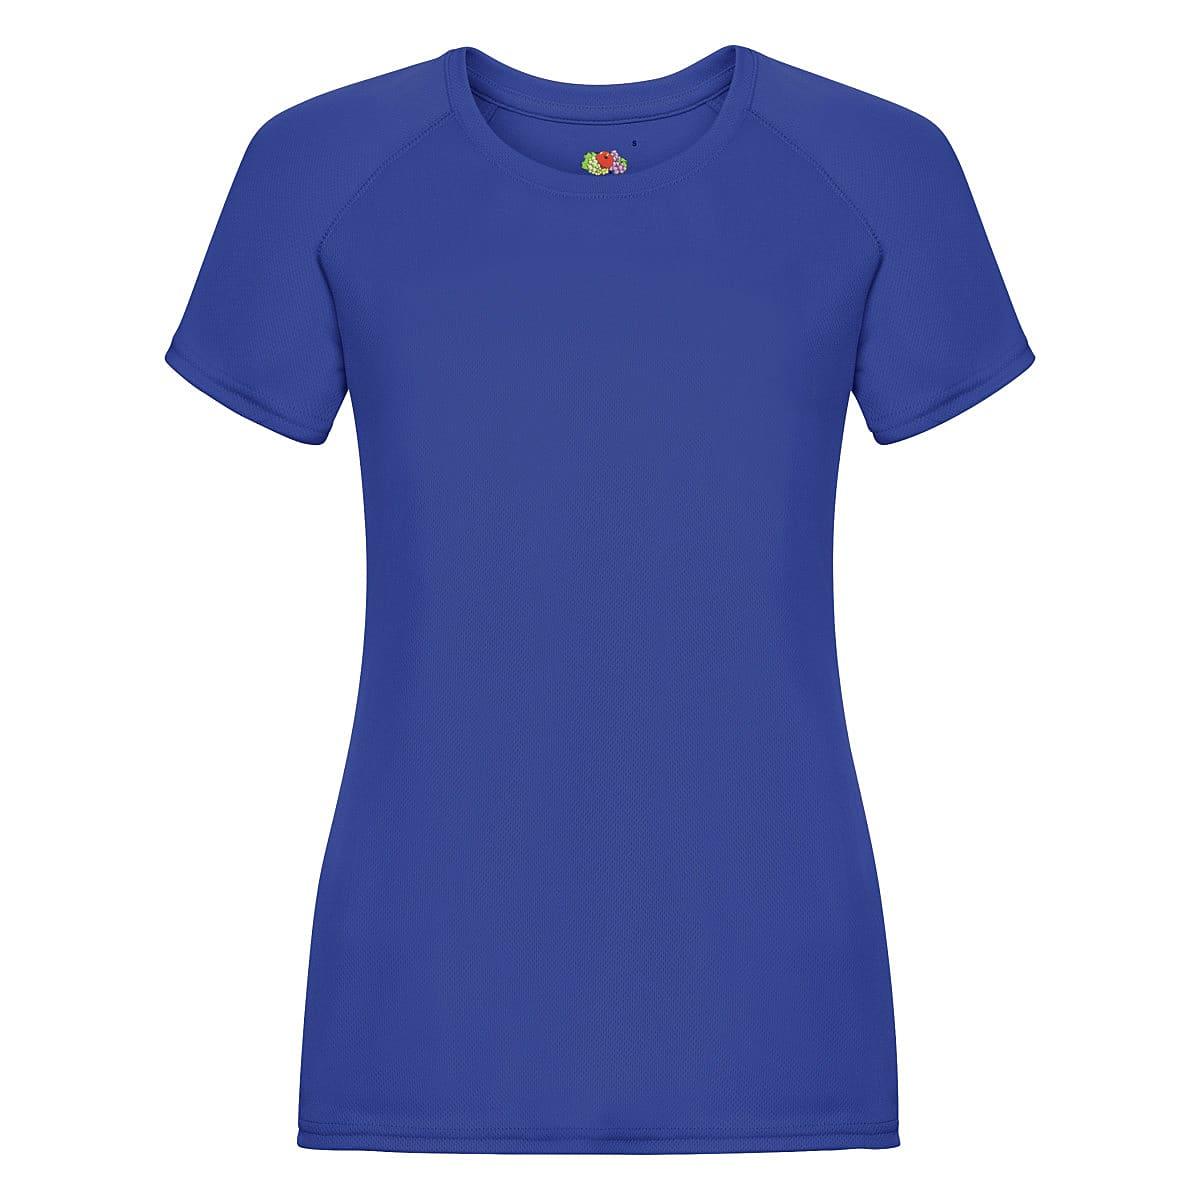 Fruit Of The Loom Womens Performance T-Shirt in Royal Blue (Product Code: 61392)